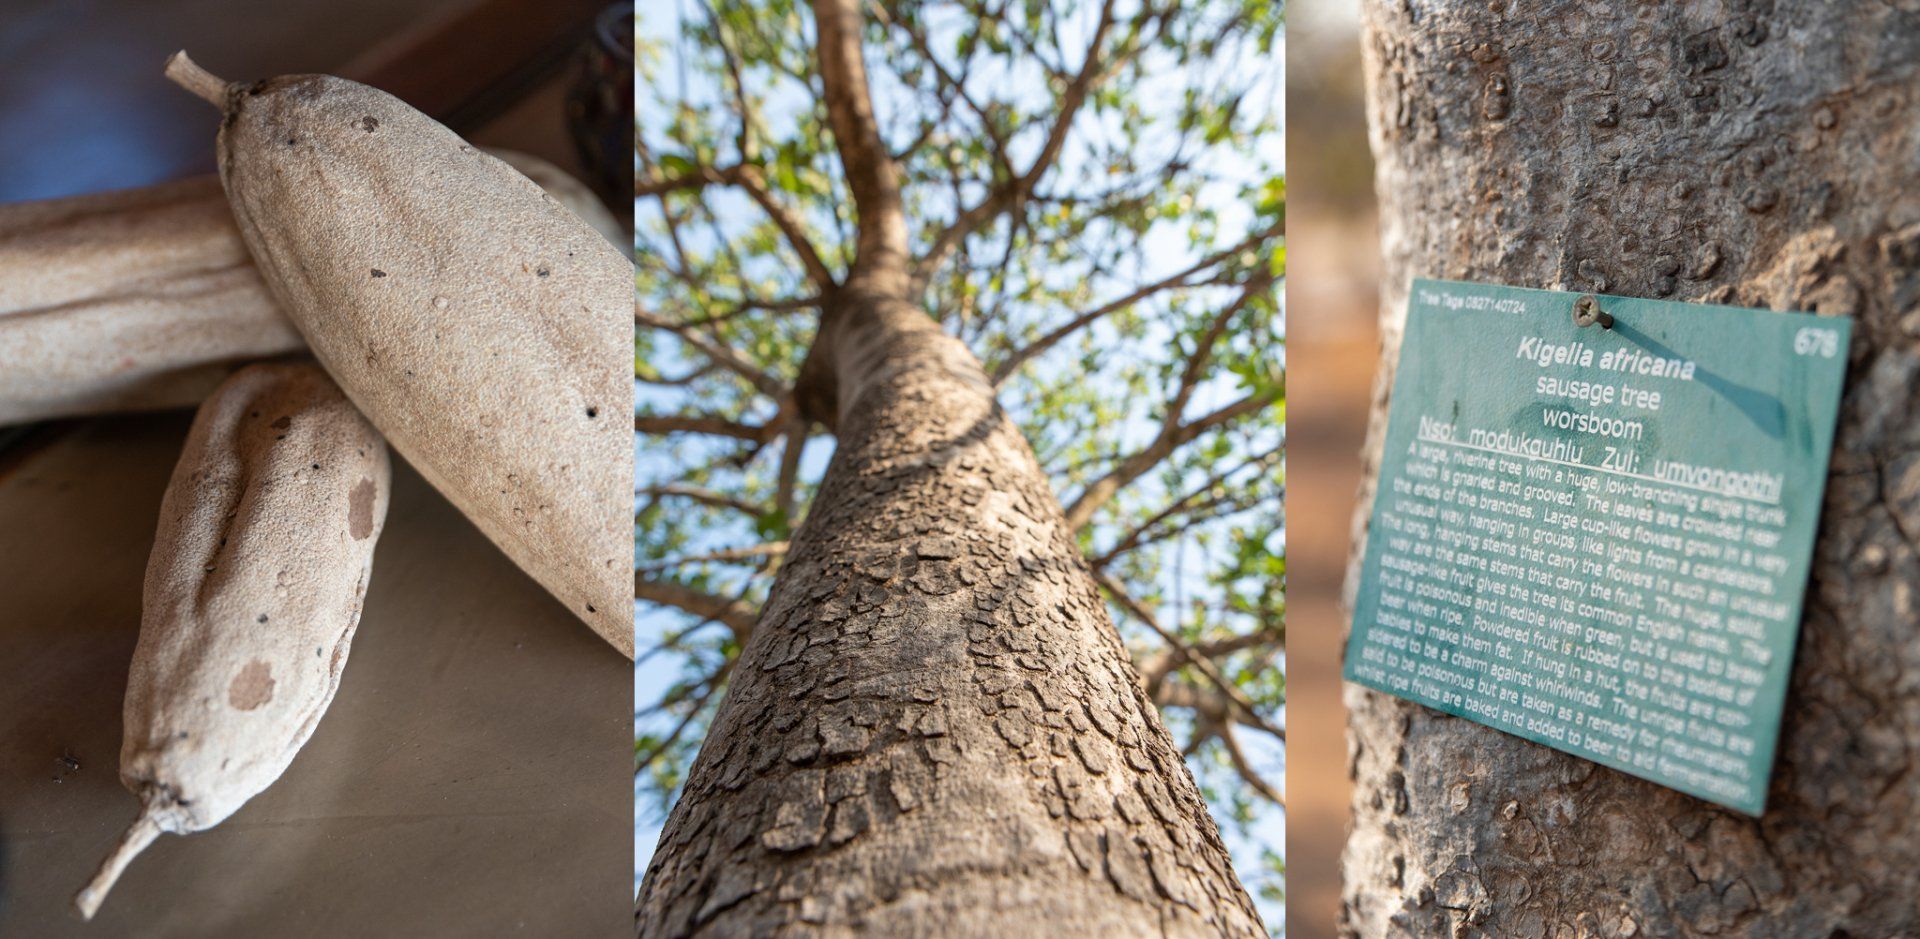 a tree with a label that says ' kigelia africana ' on it